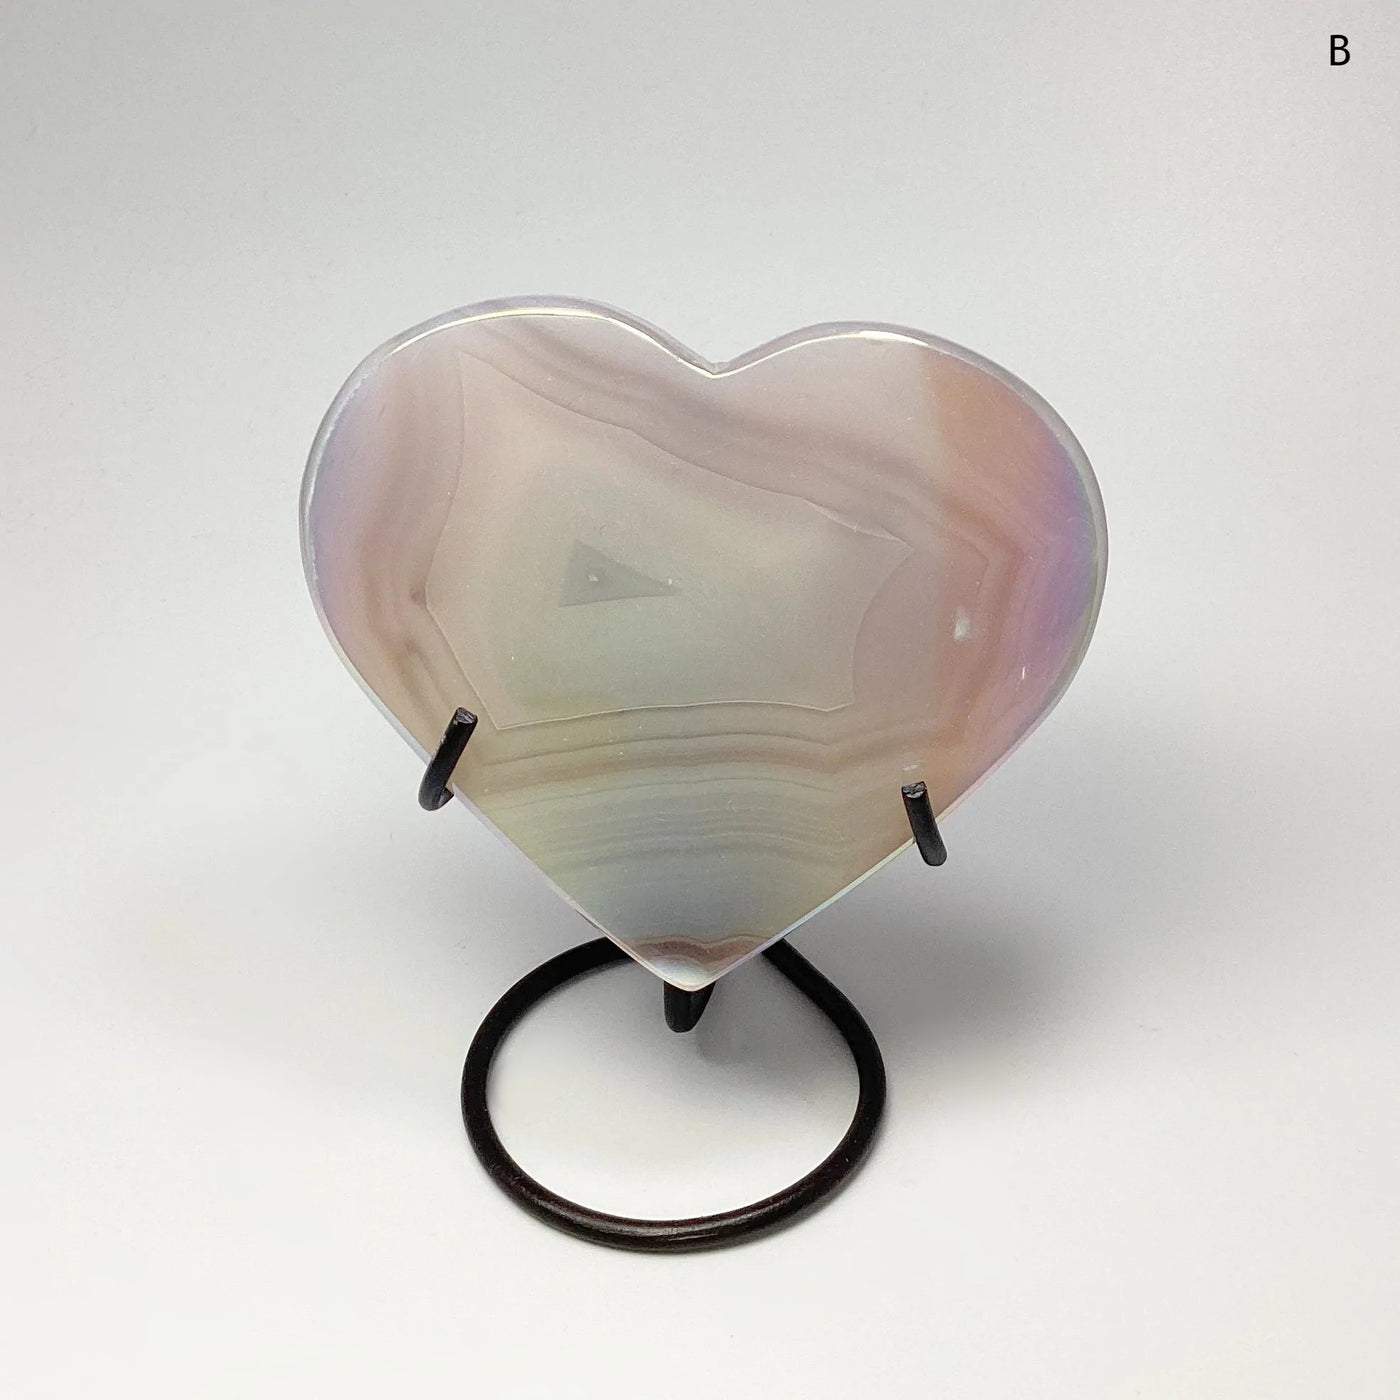 Rainbow Agate Heart on Stand at $85 Each